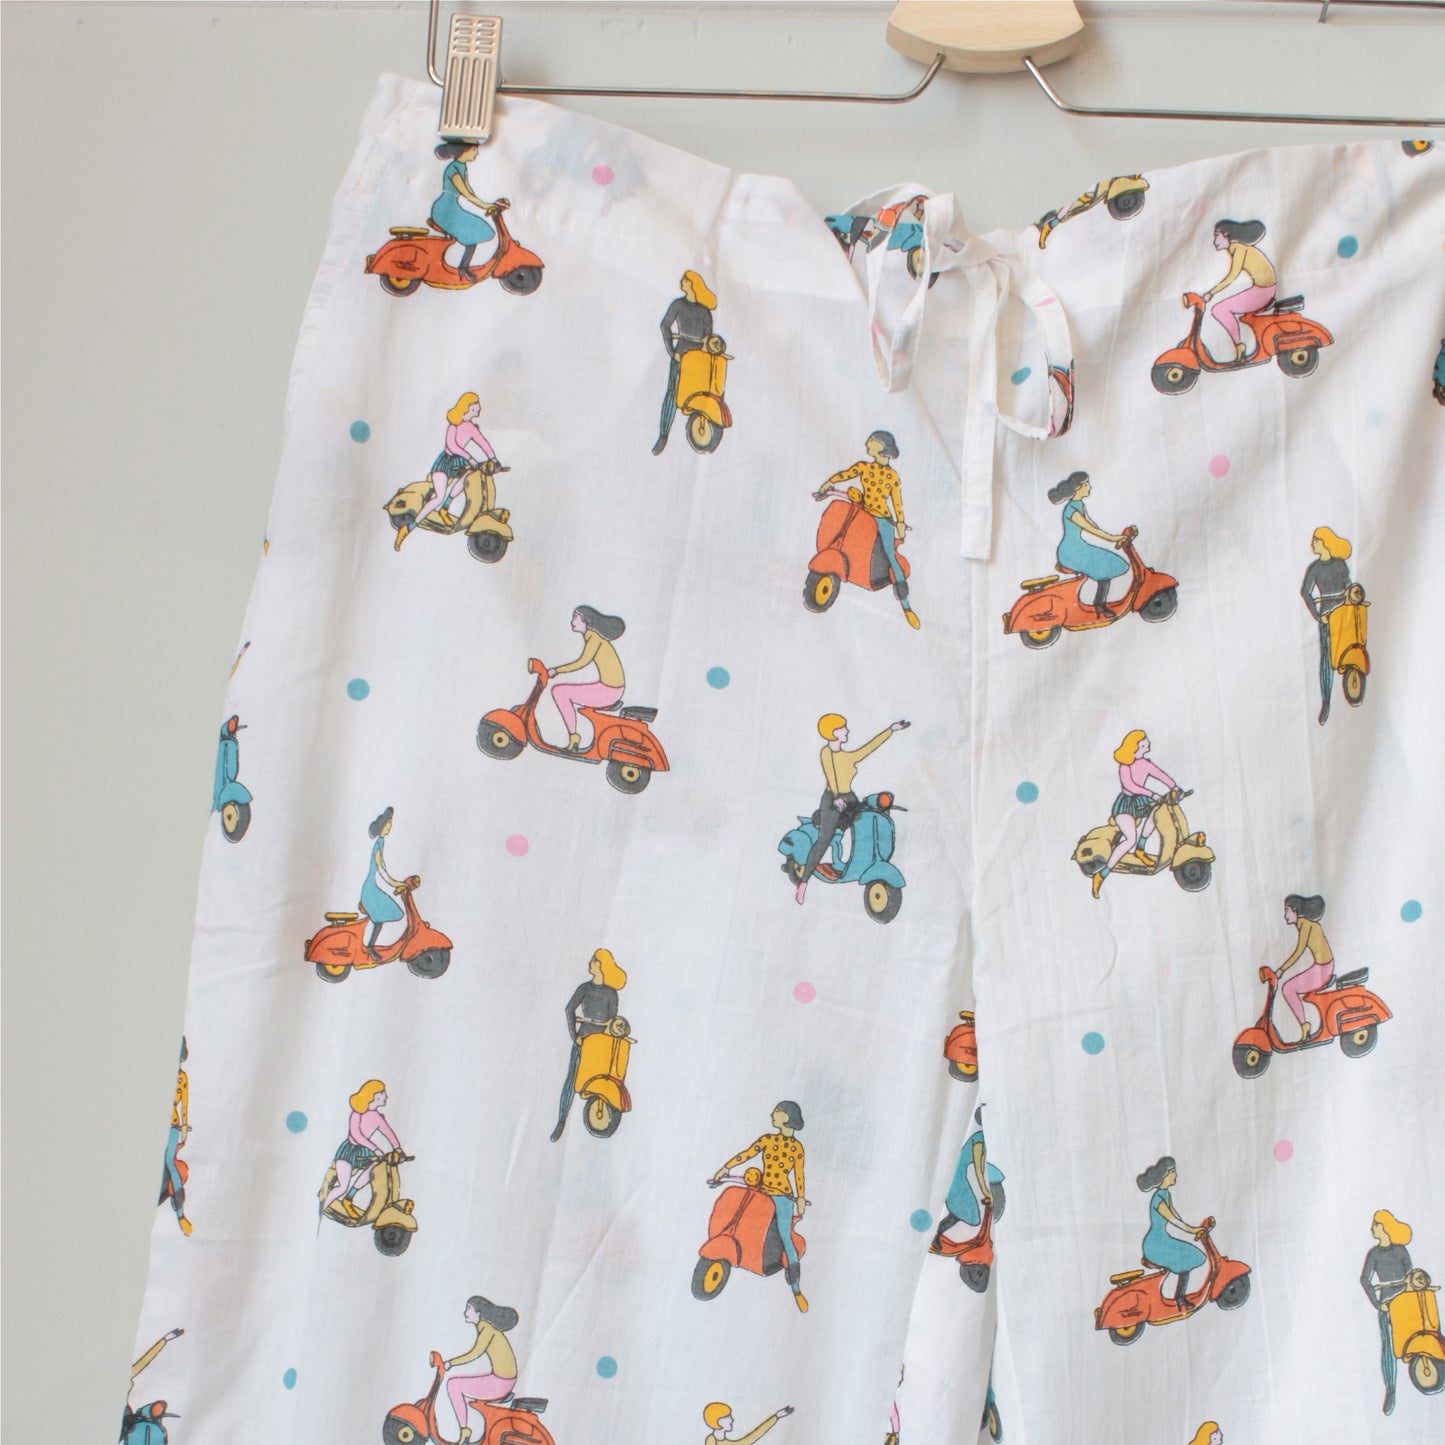 Cotton Pajama Pants in a Bag - Extra Large